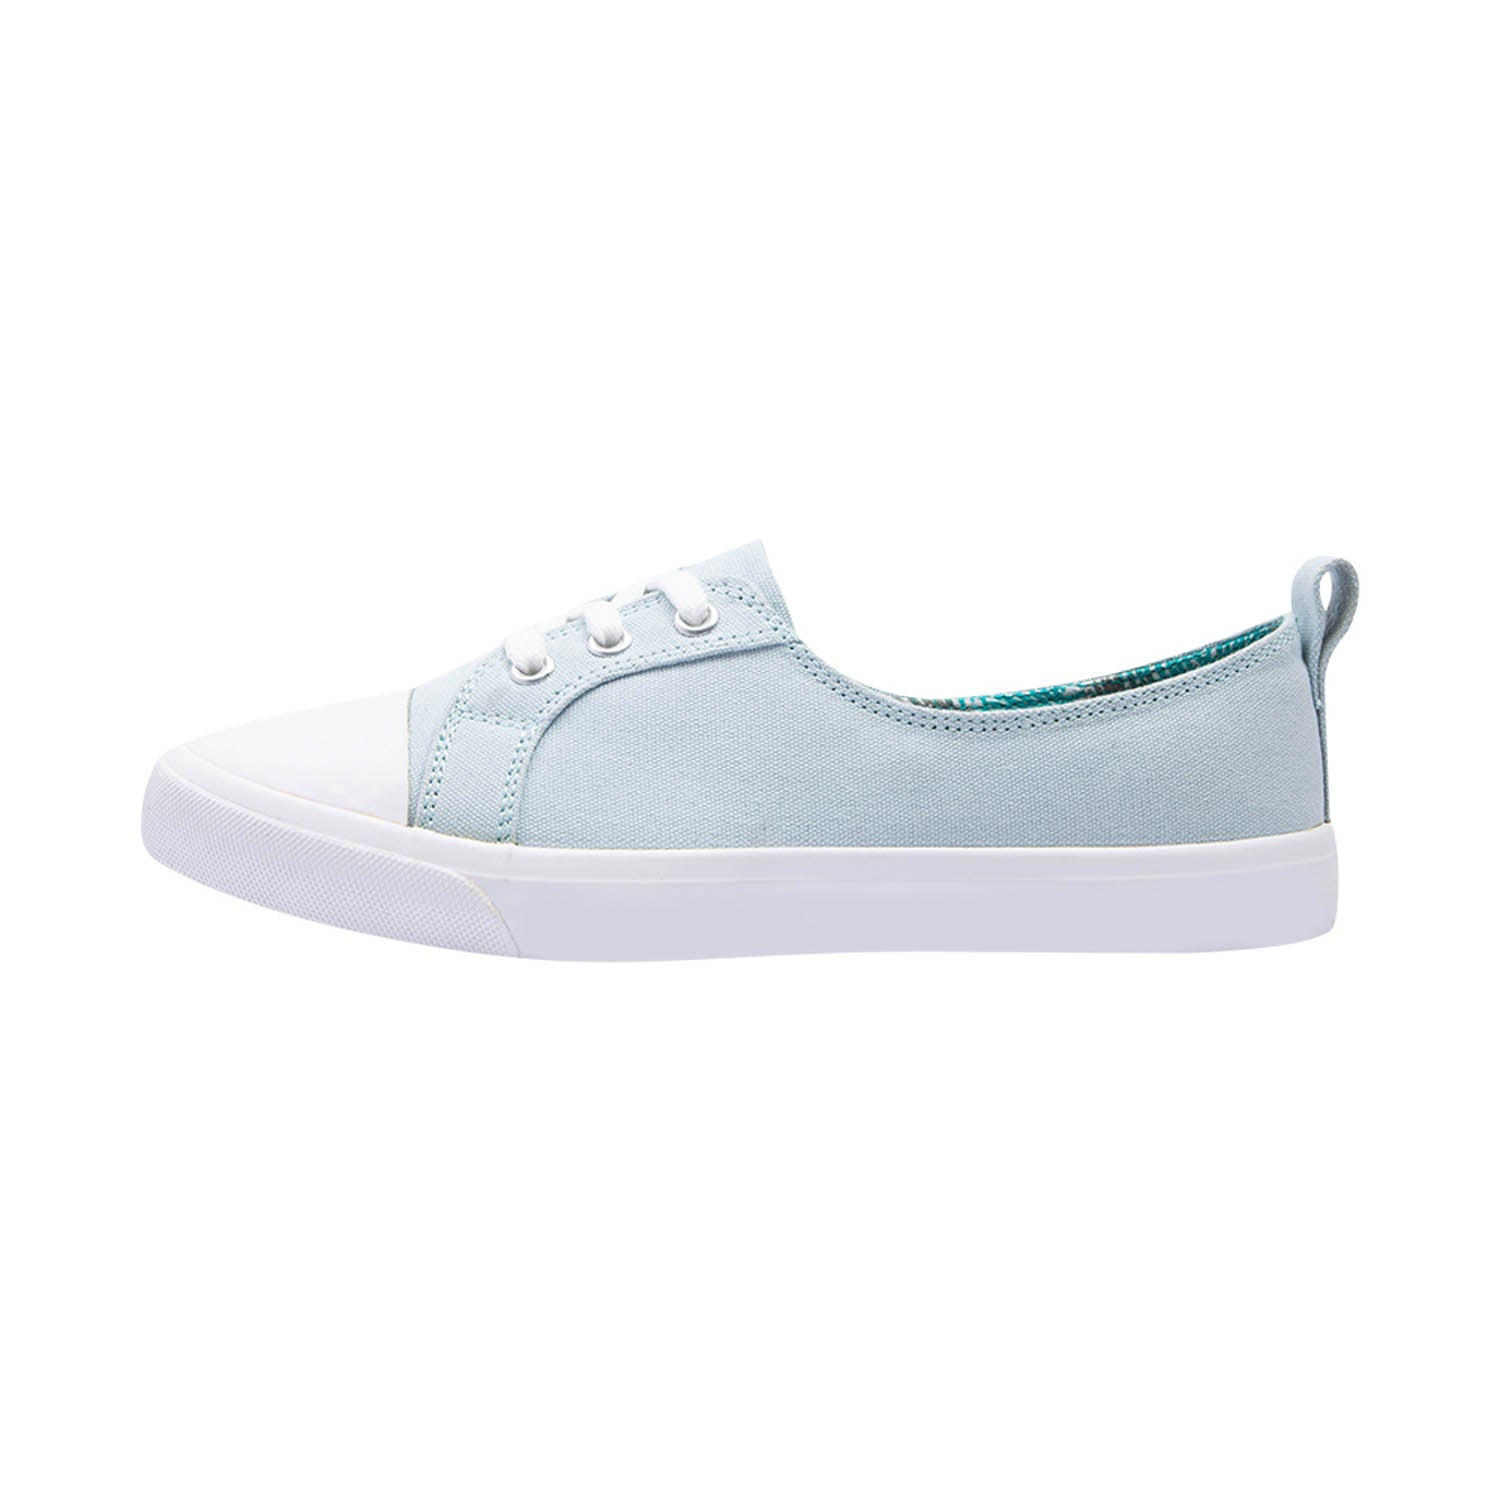 Eeken Crony From The House Of Paragon Canvas Shoes For Women (Blue)